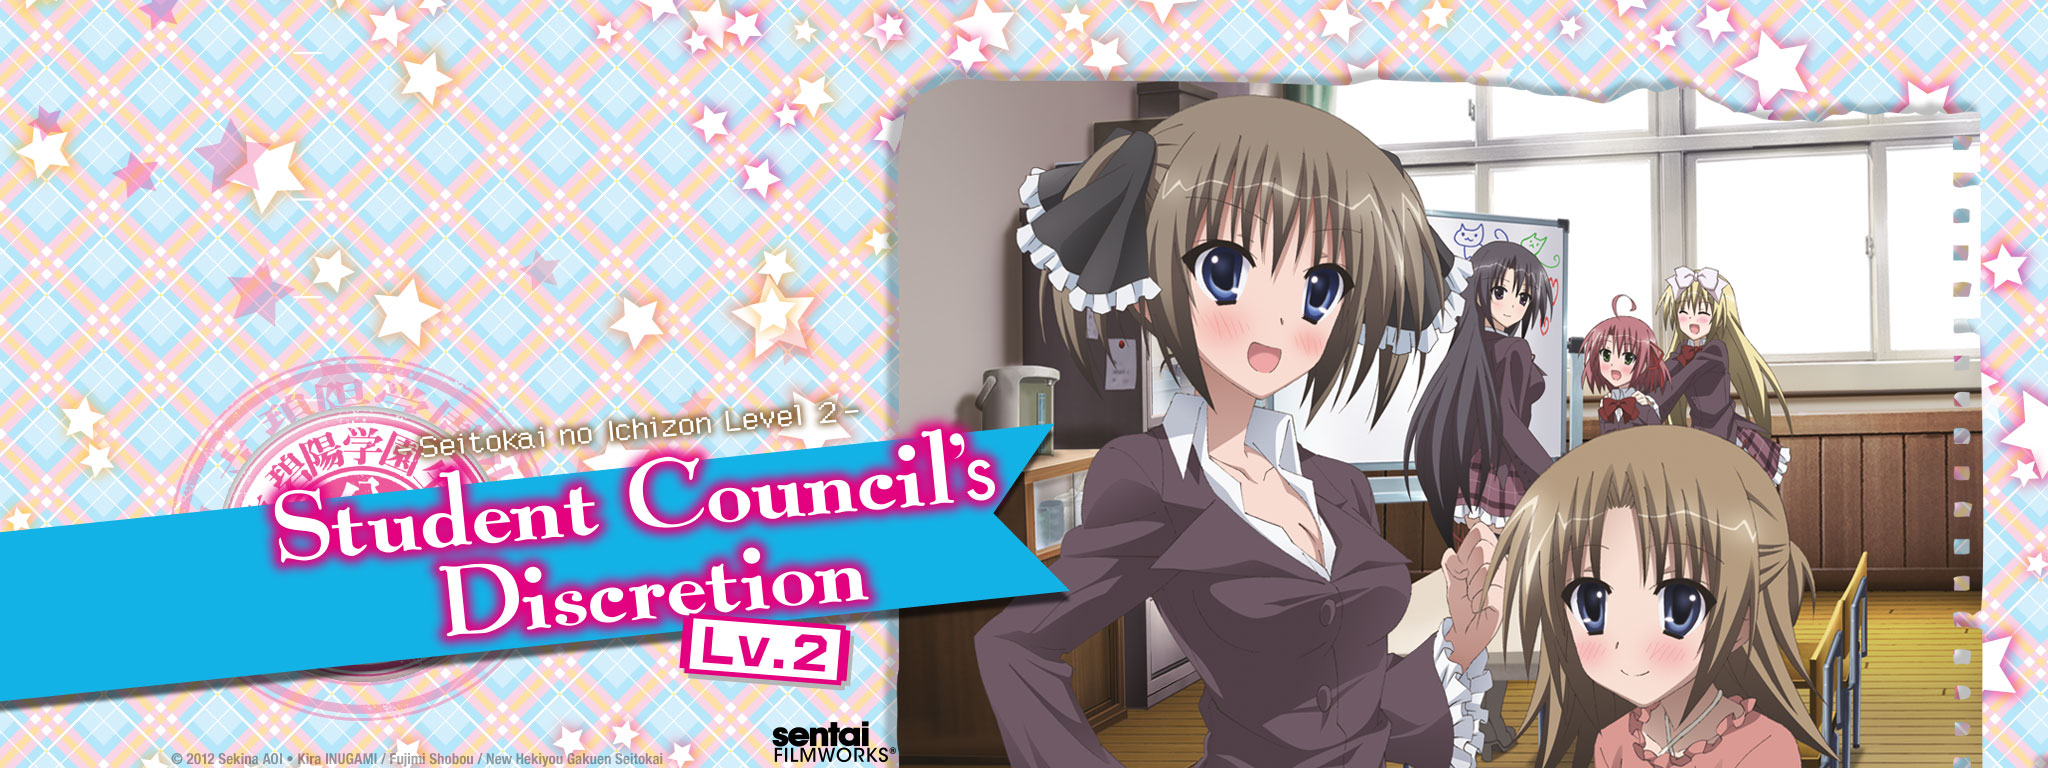 Title Art for Student Council's Discretion Level 2